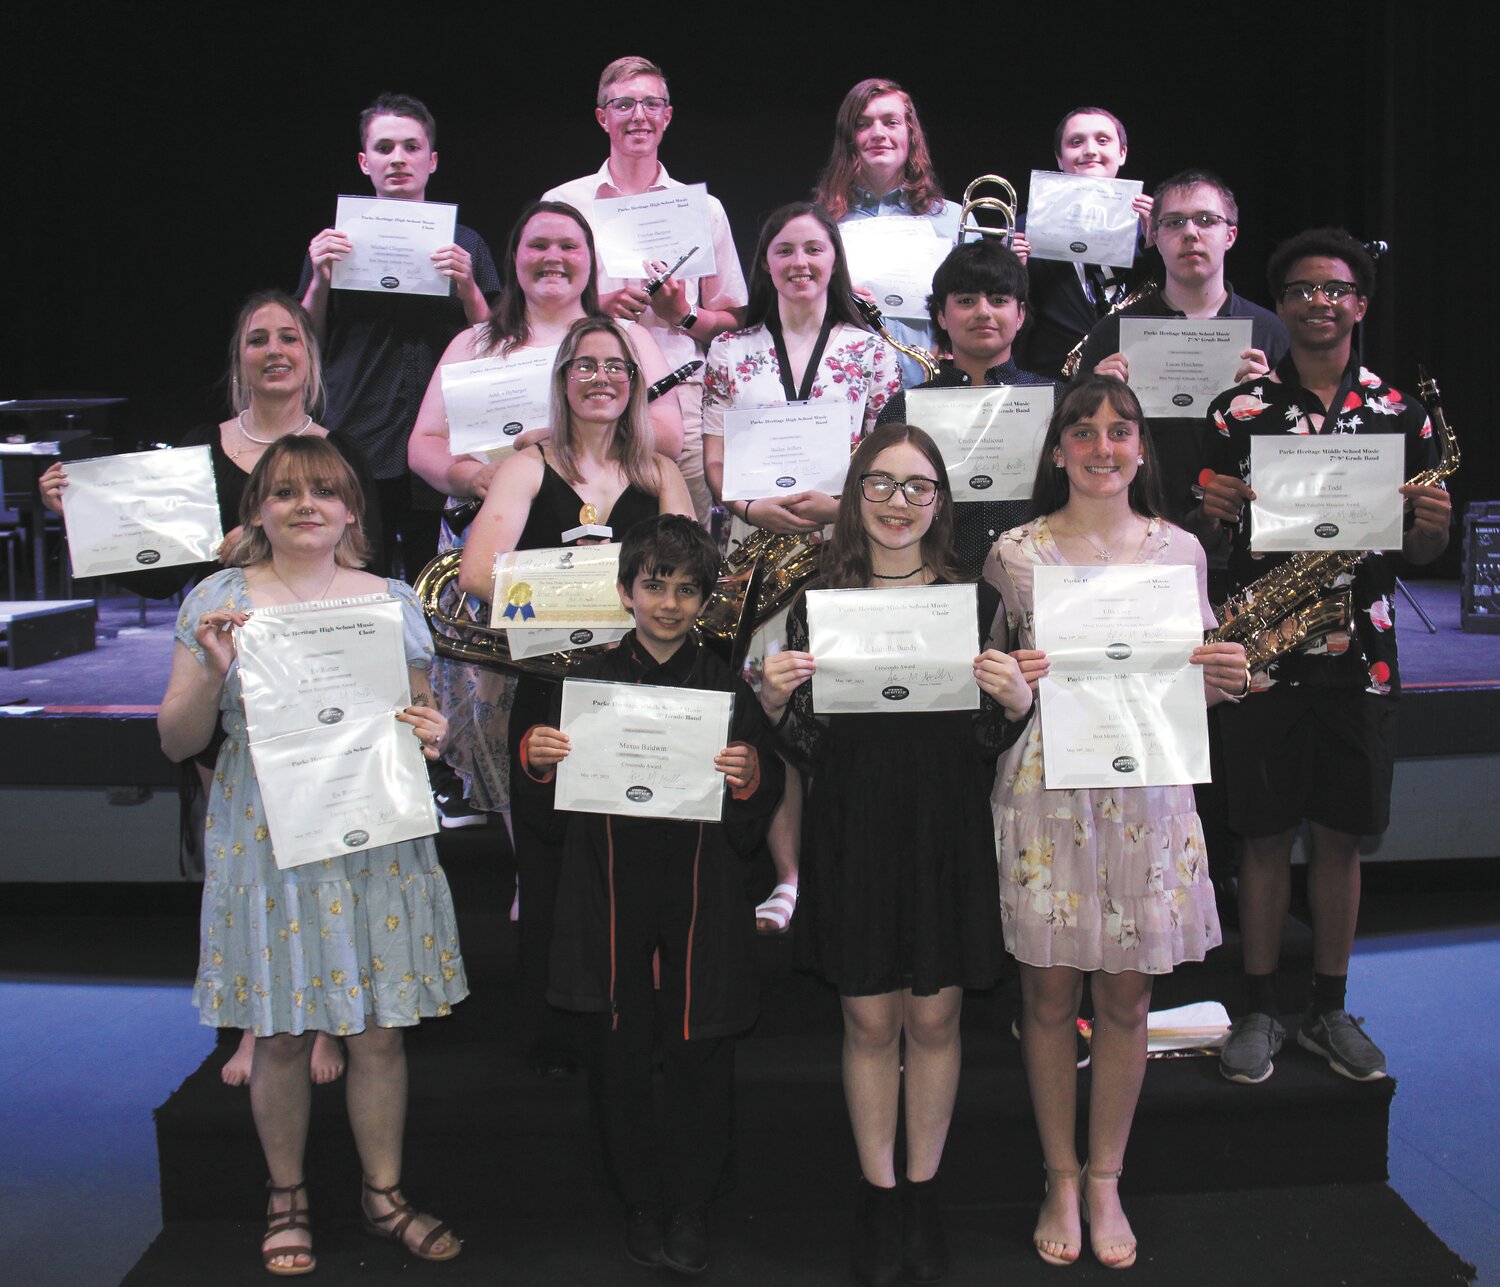 PHMS and PHHS students earning music awards at the spring concert were front row, Ev Rutter, Maxus Baldwin, Isabella Bundy and Ella Lacy; second row, Kimberly Koren, Alison Nicholas, Crafton Malicoat and Cian Todd; third row, Ashlyn Hybarger, Bailey Jeffers, and Lucas Hutchens; and back row, Michael Clingermann, Treyton Burgess, Aidan Gillooly and Steven Myers. Not pictured is Kera Boblett.